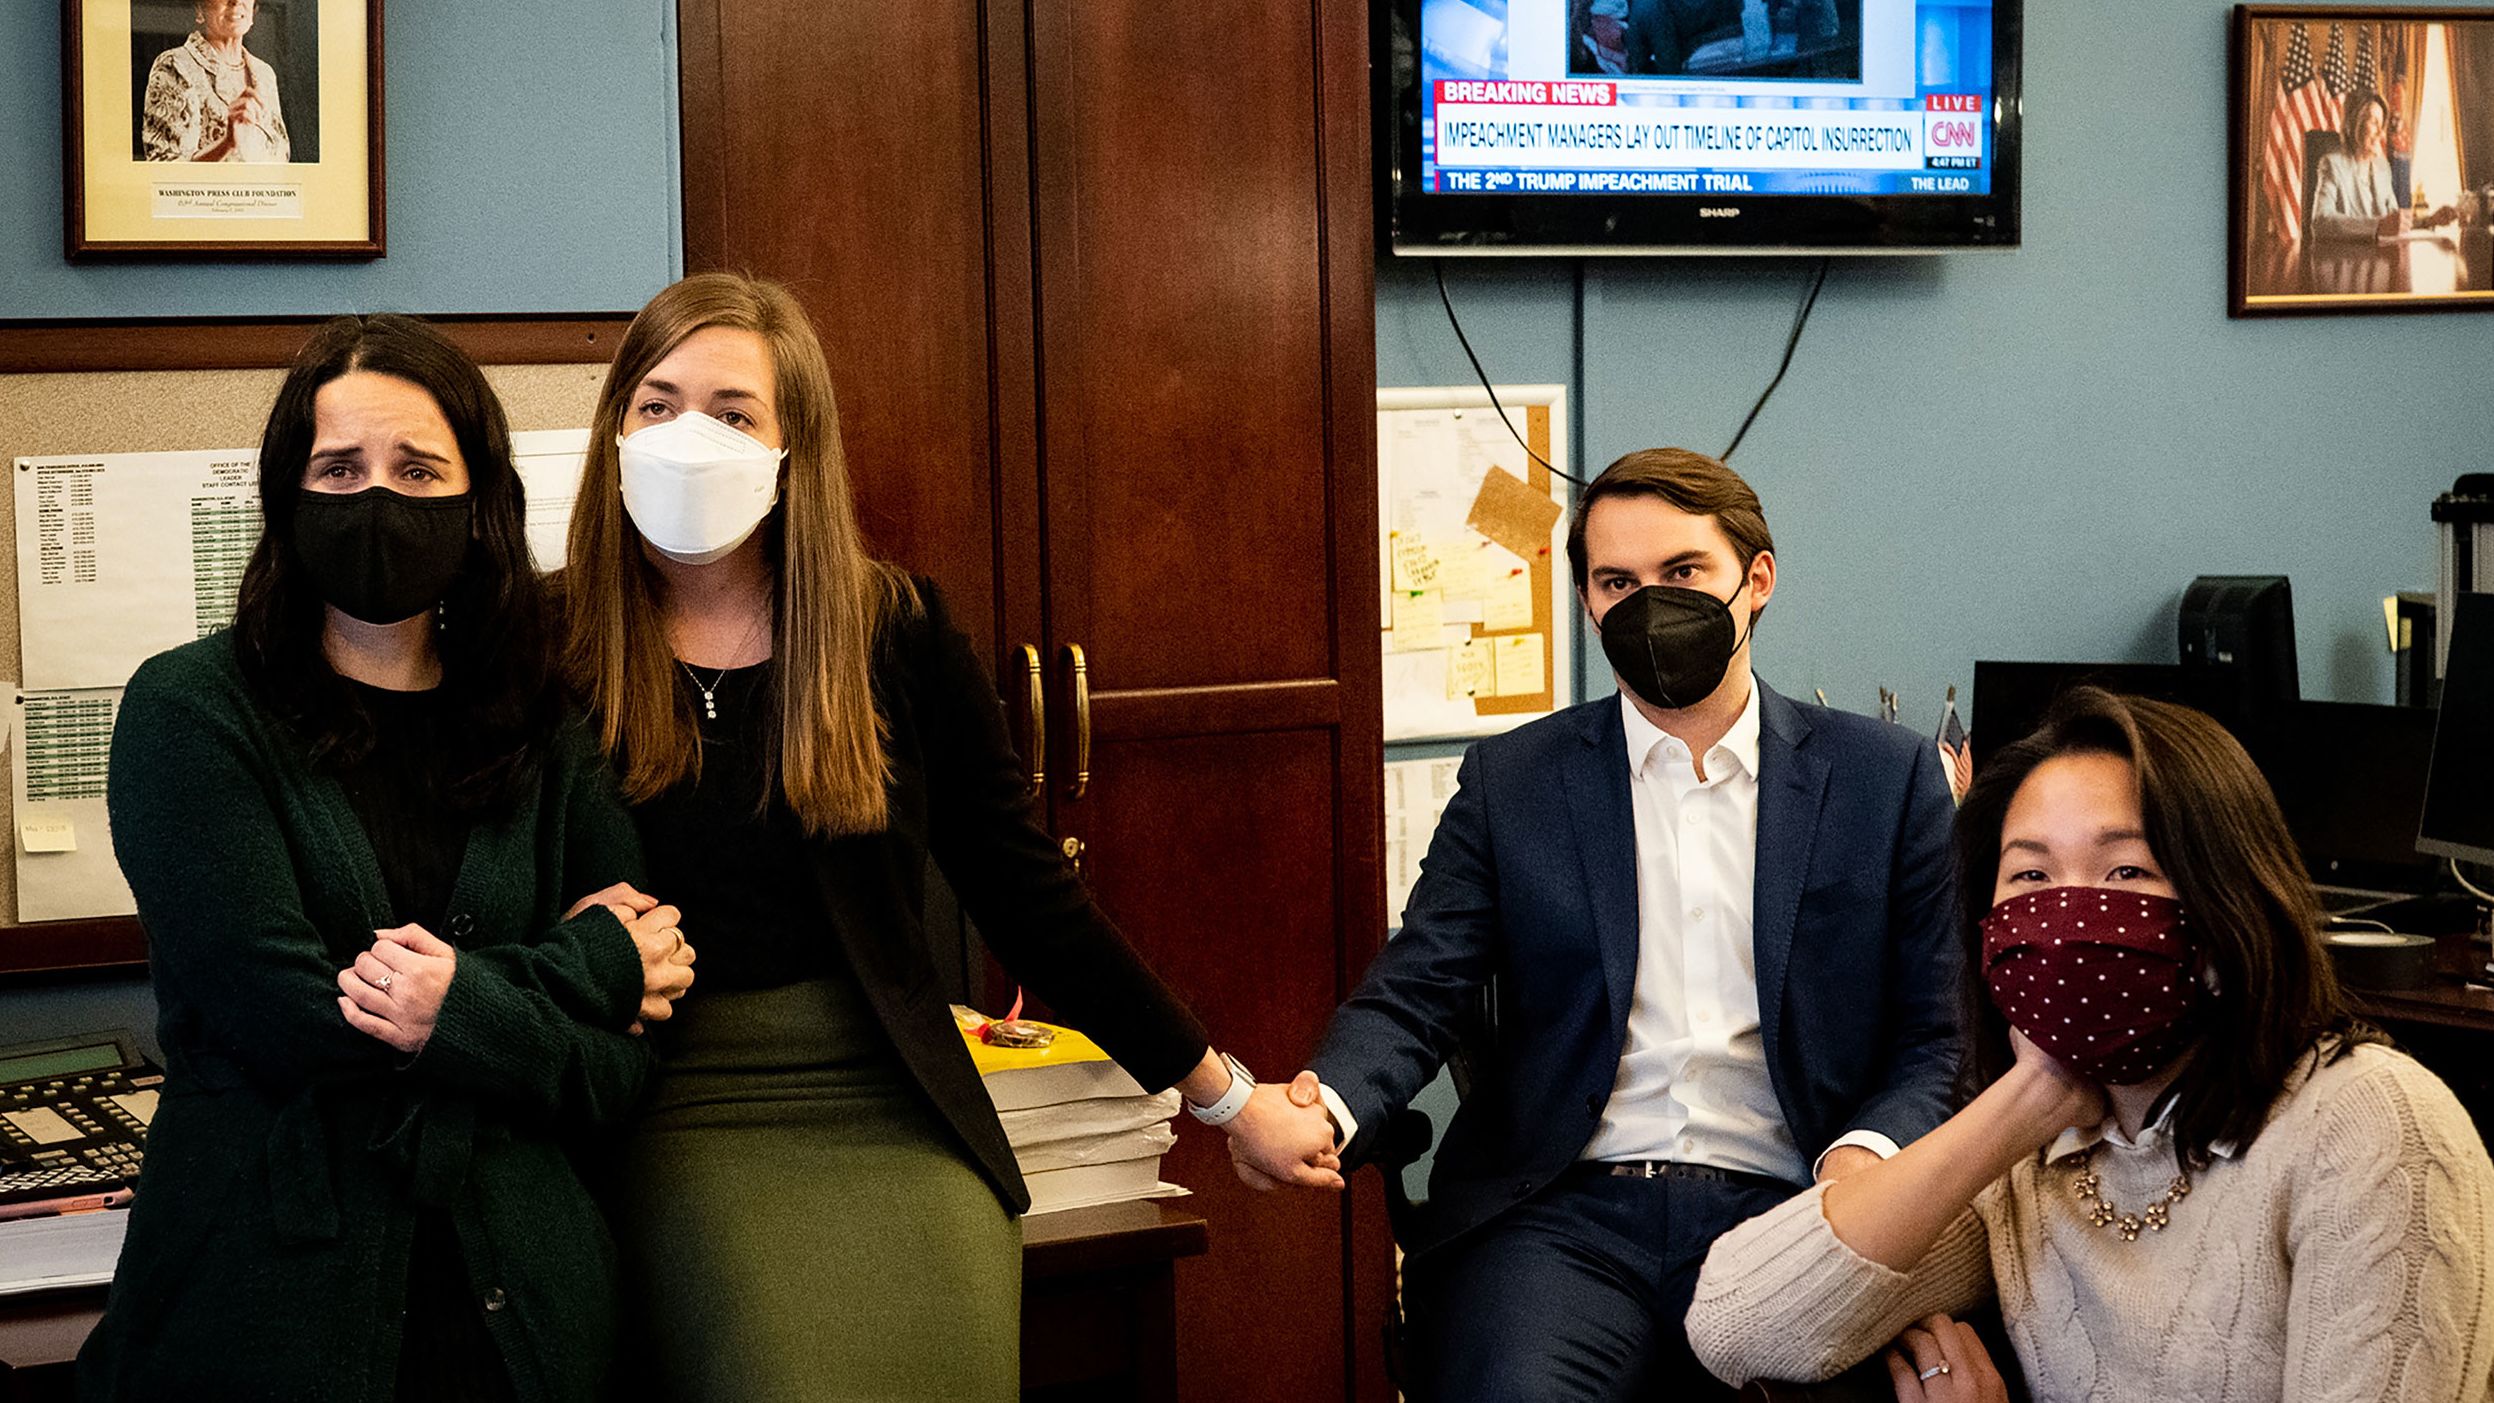 Members of Pelosi's staff watch new footage of the attack on Wednesday, February 10. The footage was part of the case presented by House impeachment managers.